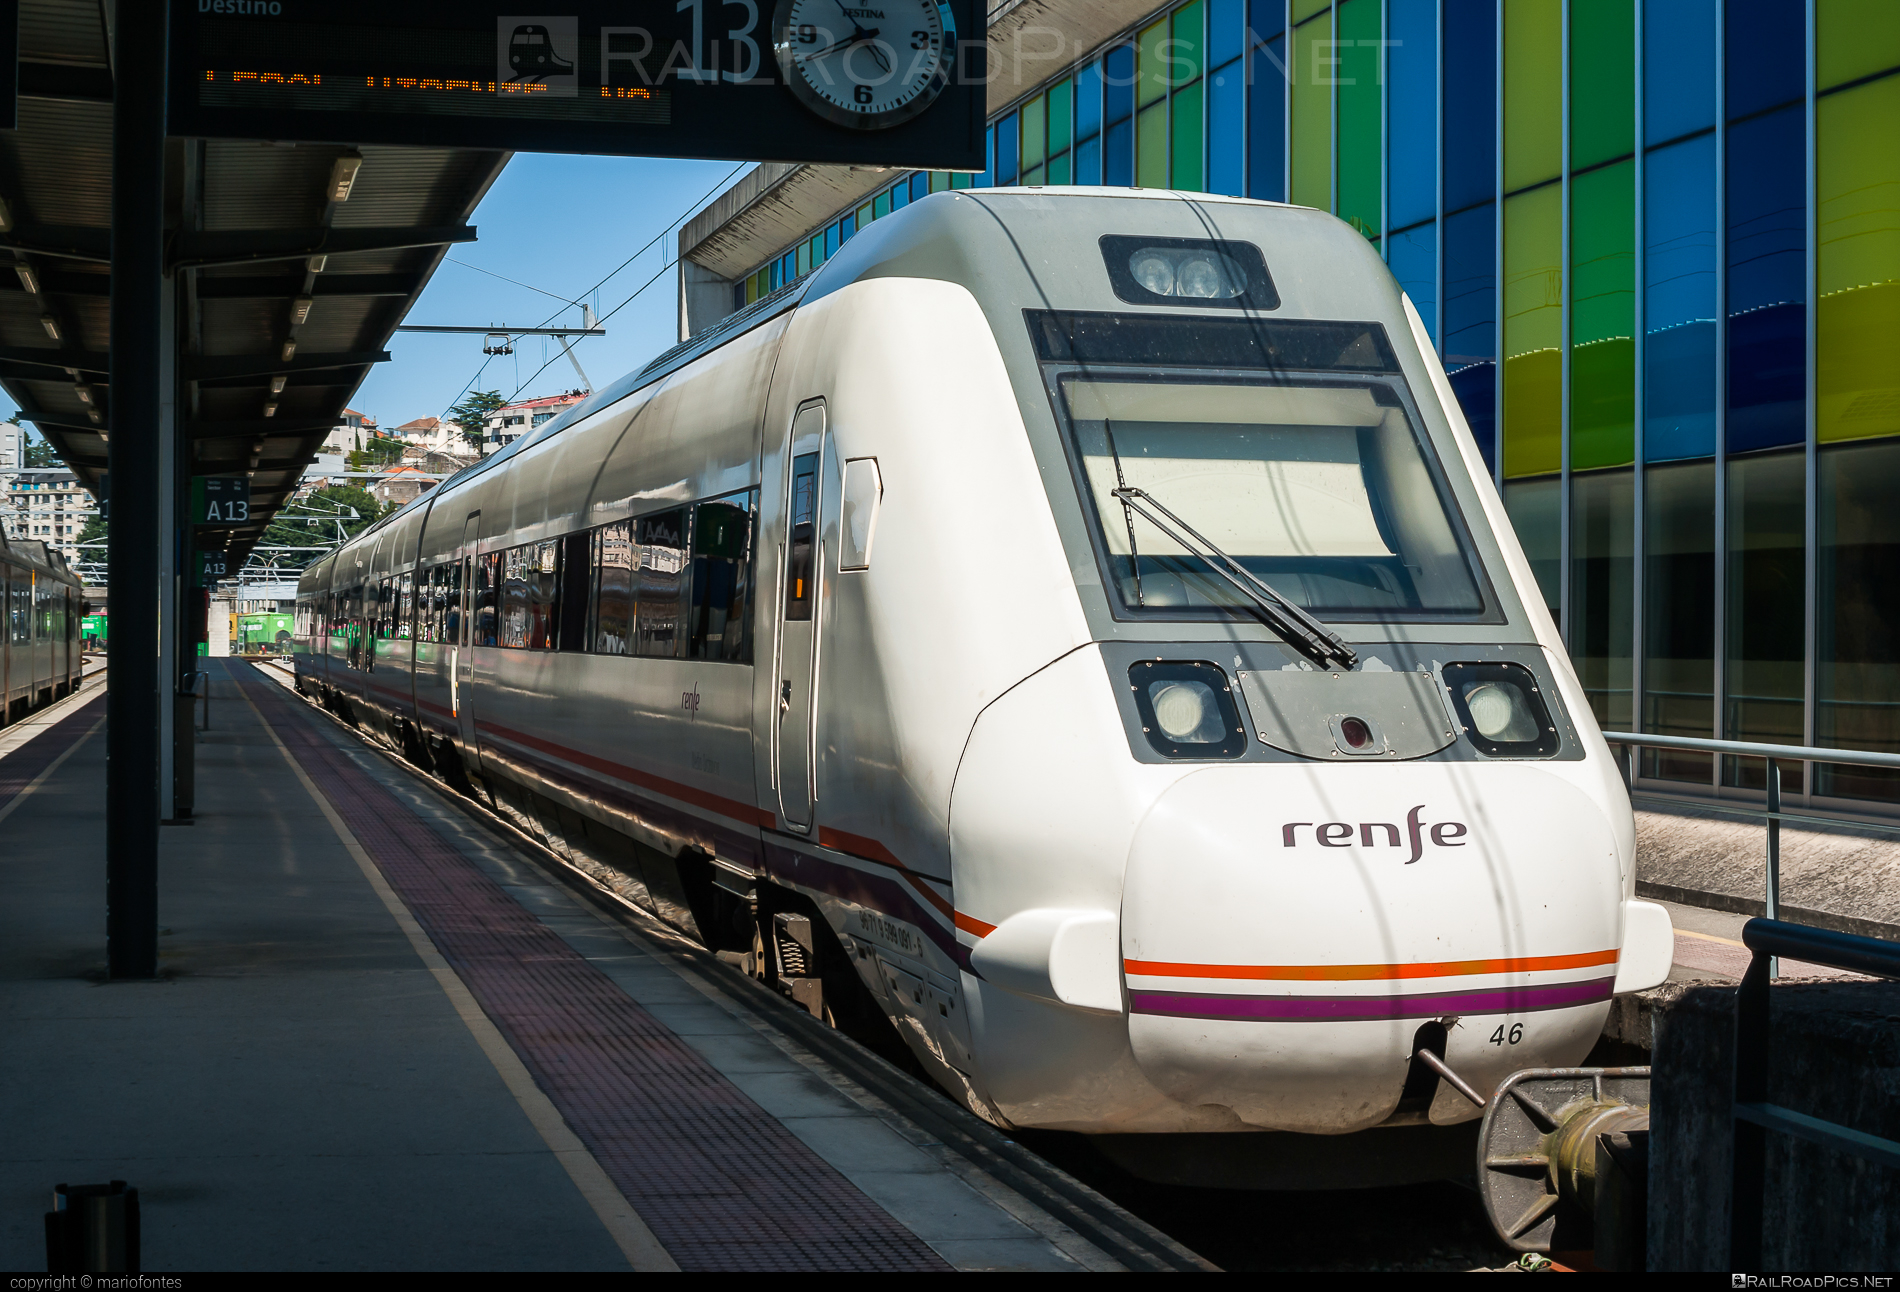 Renfe Class 599 - 091 operated by Renfe Viajeros, S.A. #caf #renfe #renfe599 #renfeClass599 #renfeViajeros #renfeViajerosSA